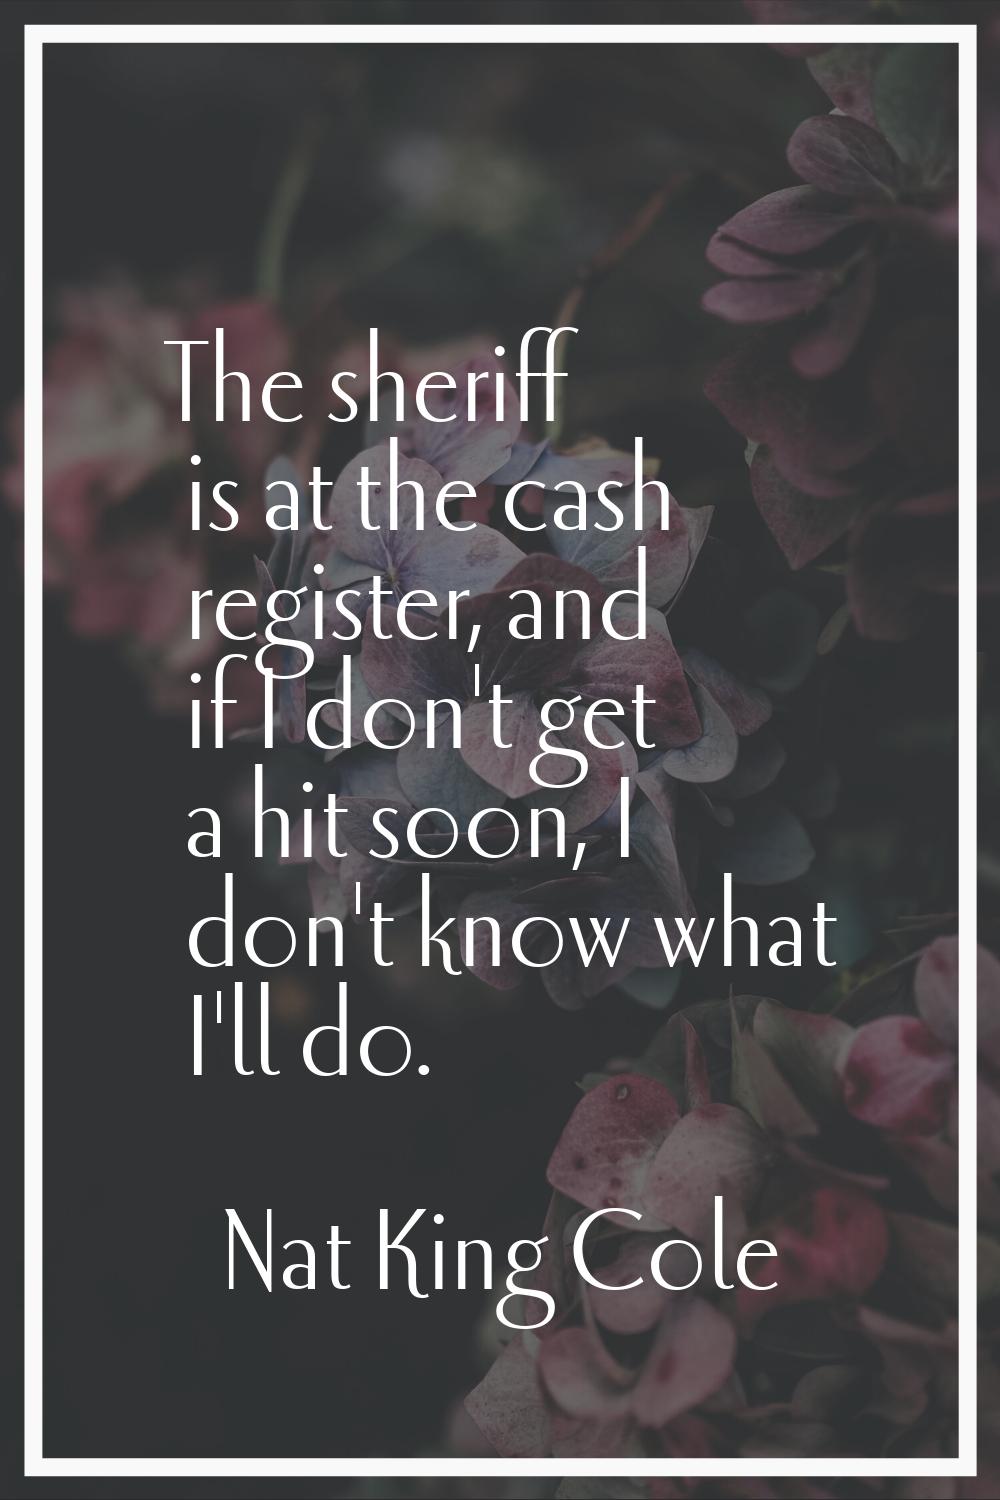 The sheriff is at the cash register, and if I don't get a hit soon, I don't know what I'll do.